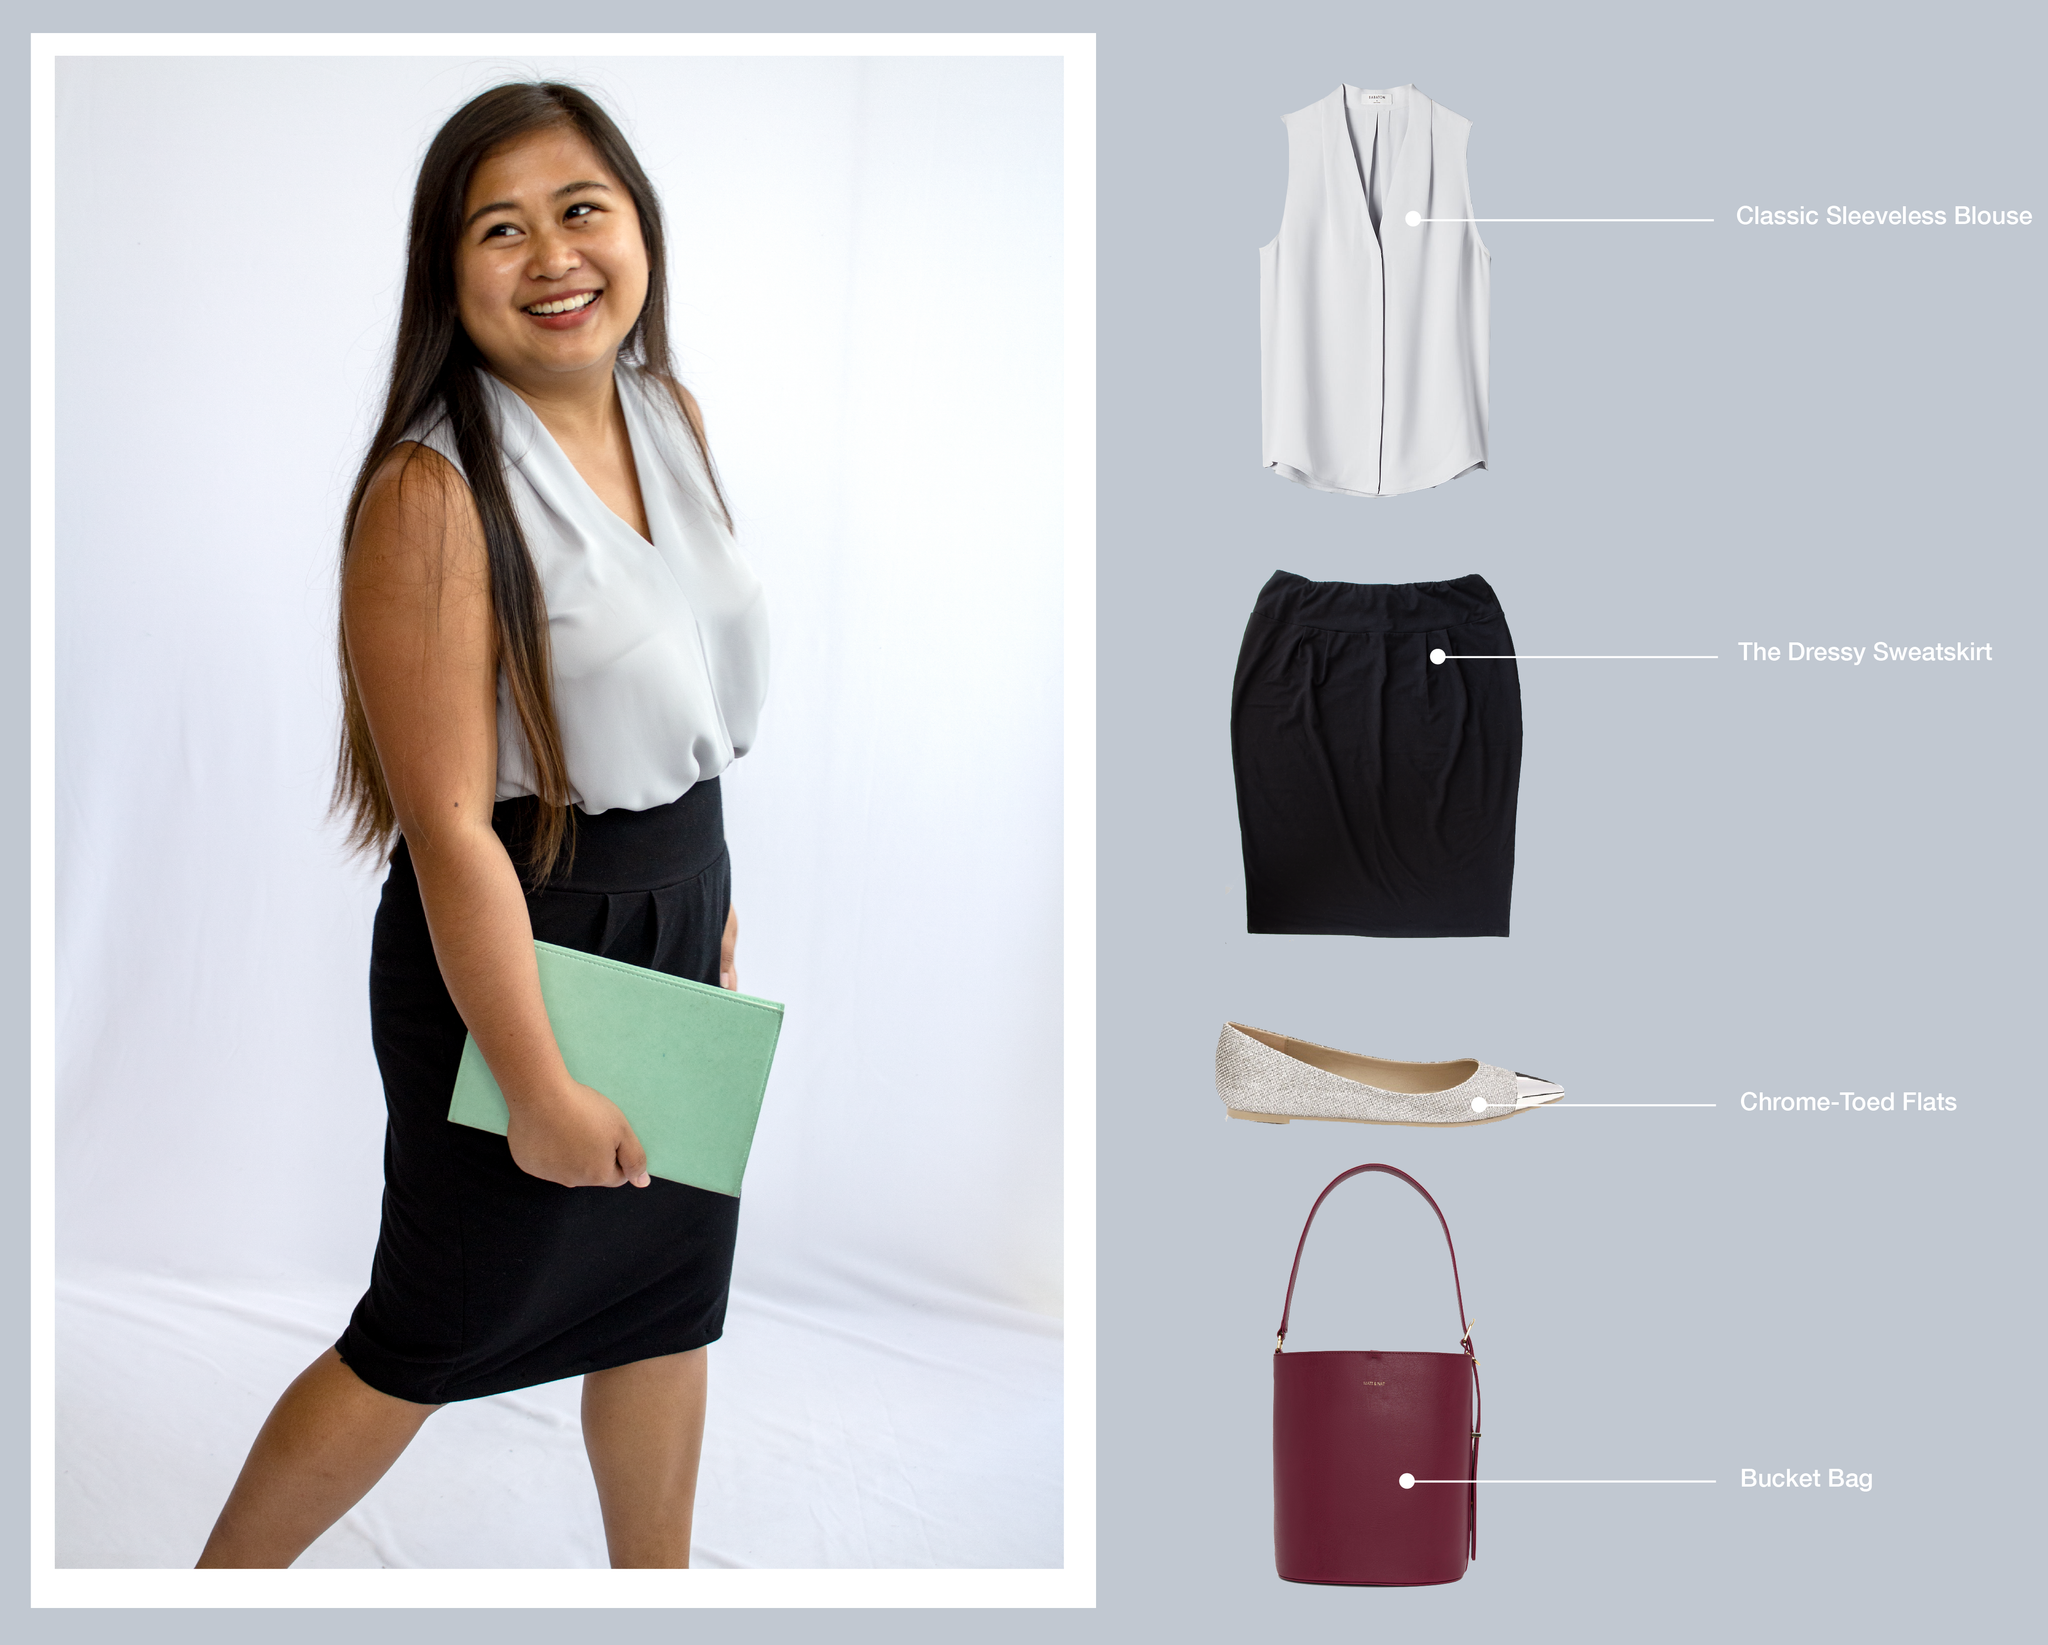 How-To-Style a Pencil Skirt 7 Days